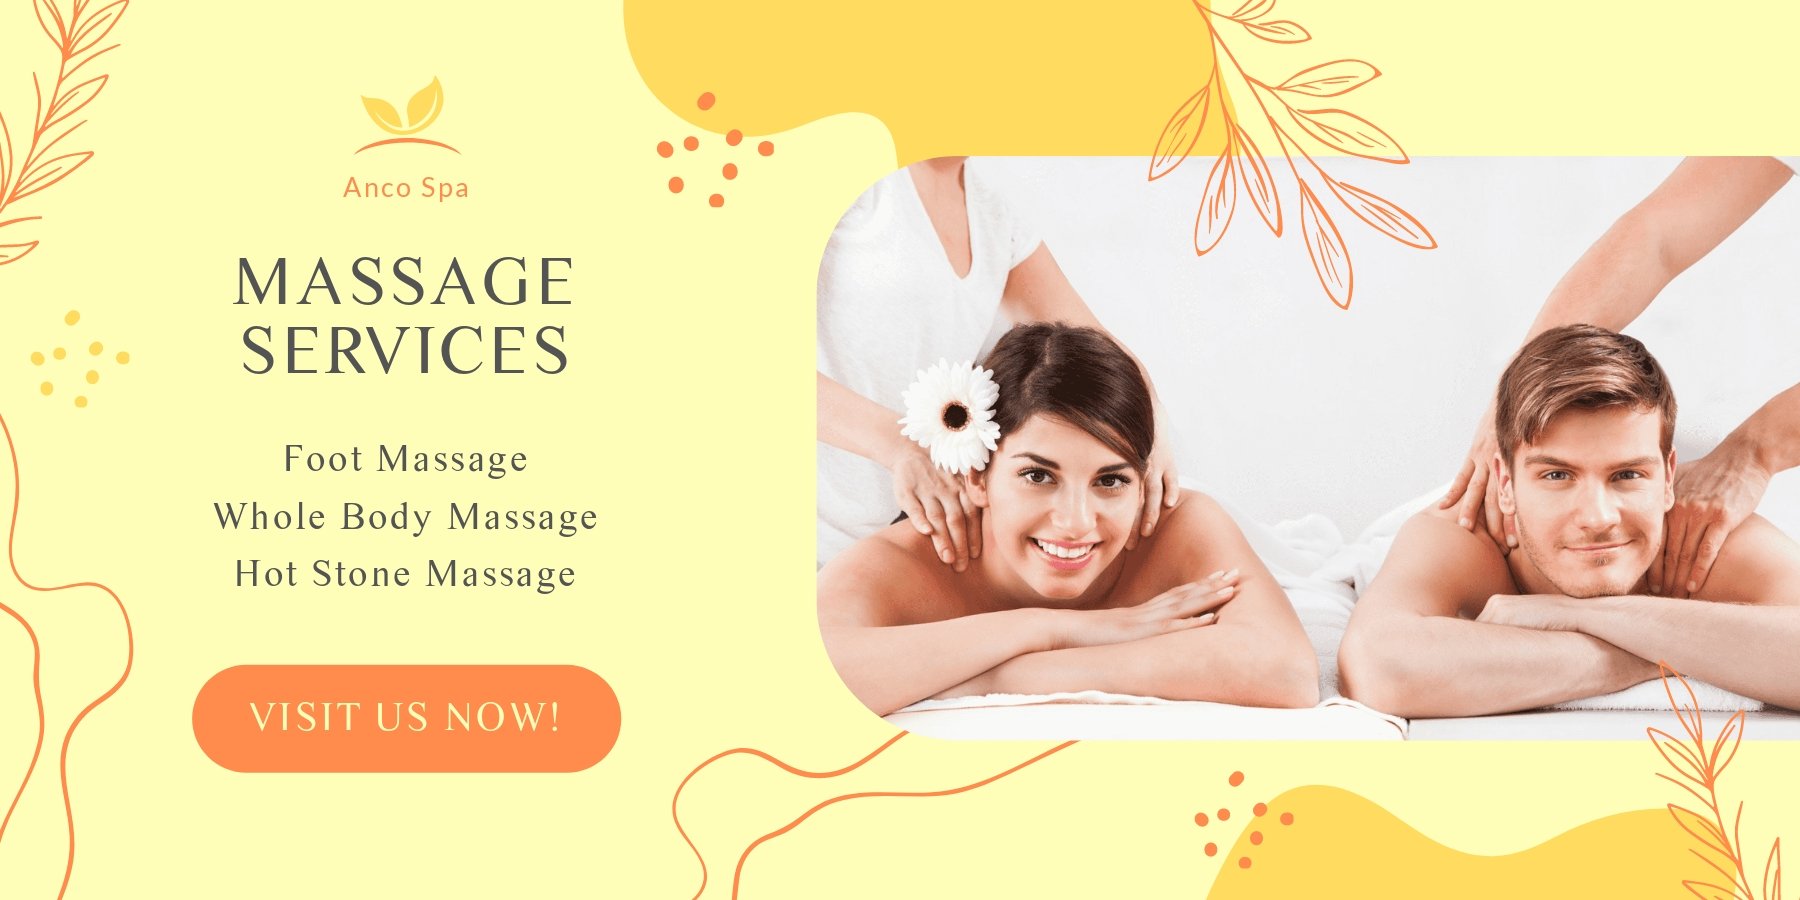 Free Massage Services Banner Template